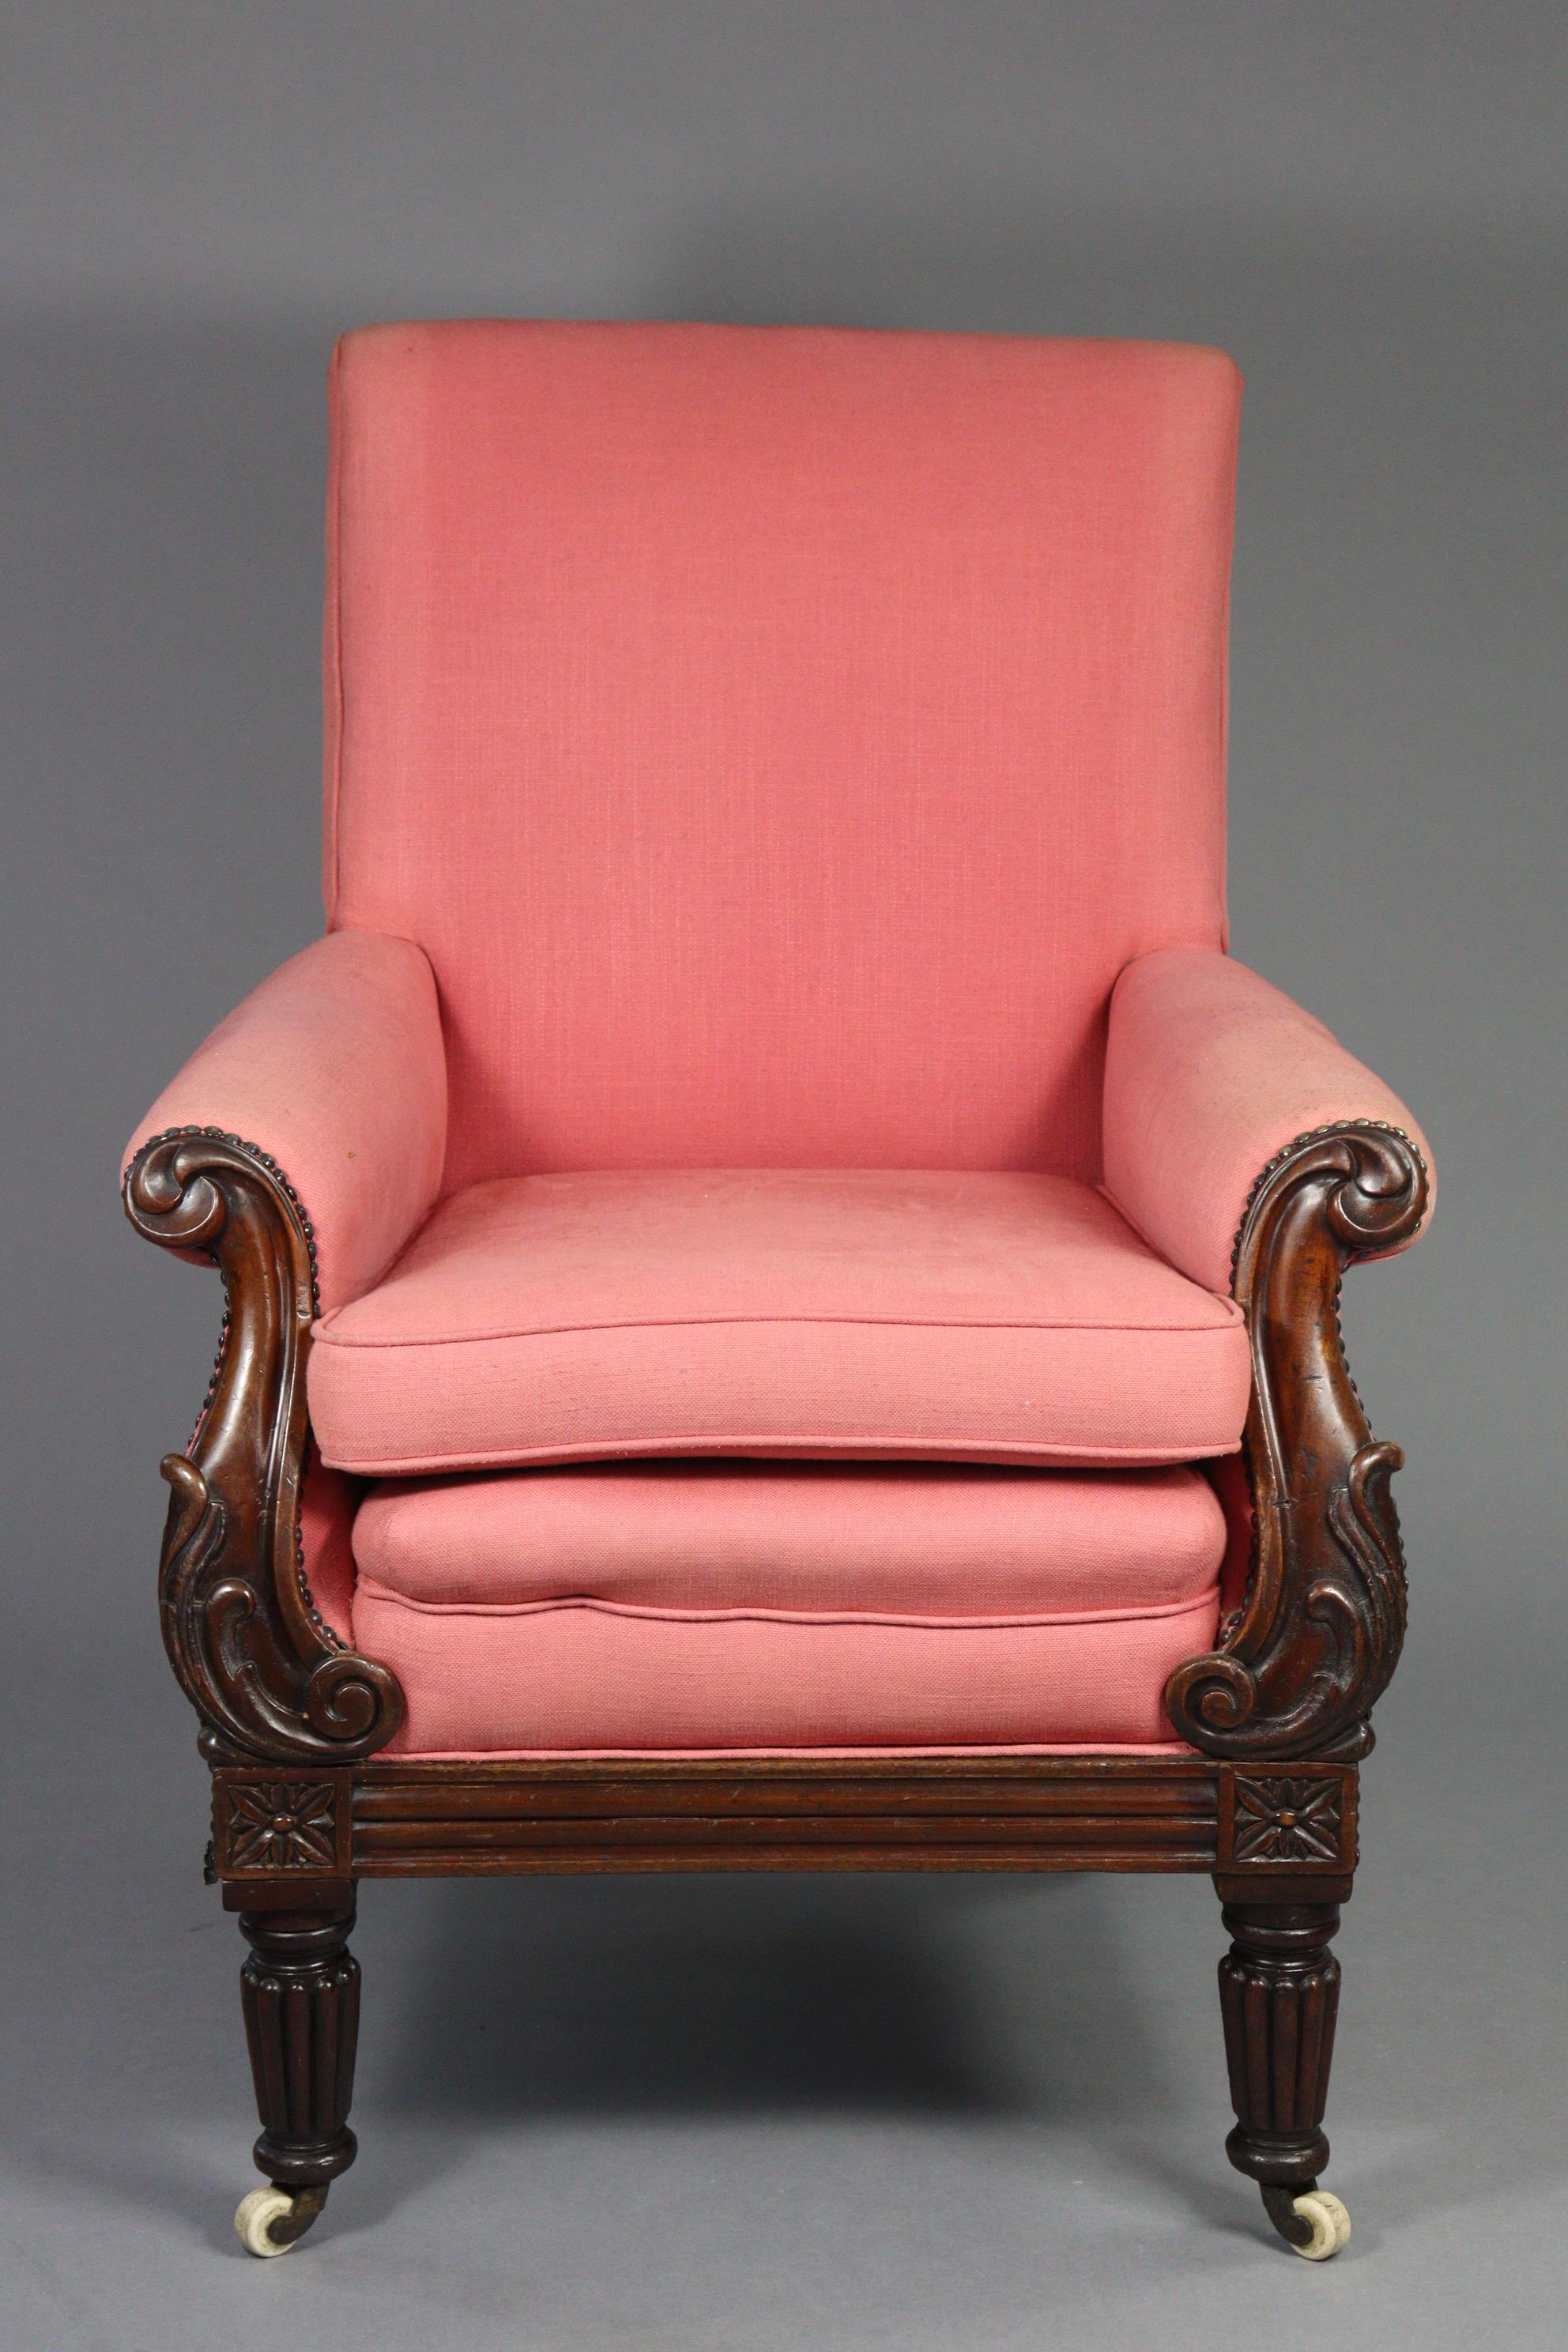 A William IV mahogany frame library armchair upholstered red fabric with loose cushions, carved - Image 2 of 3